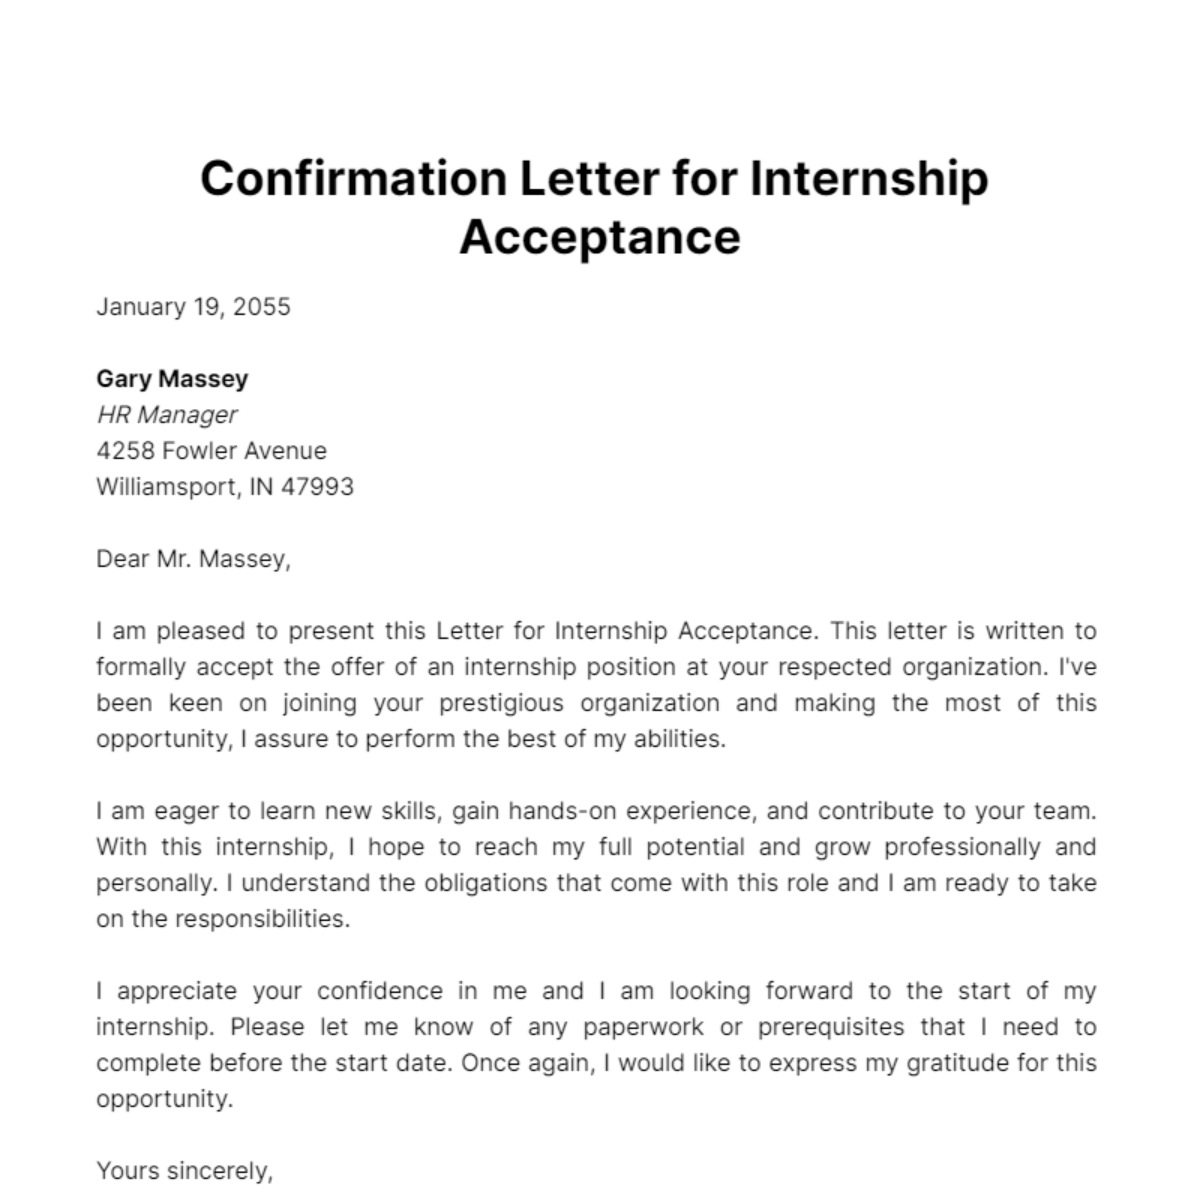 Free Confirmation Letter for Internship Acceptance Template